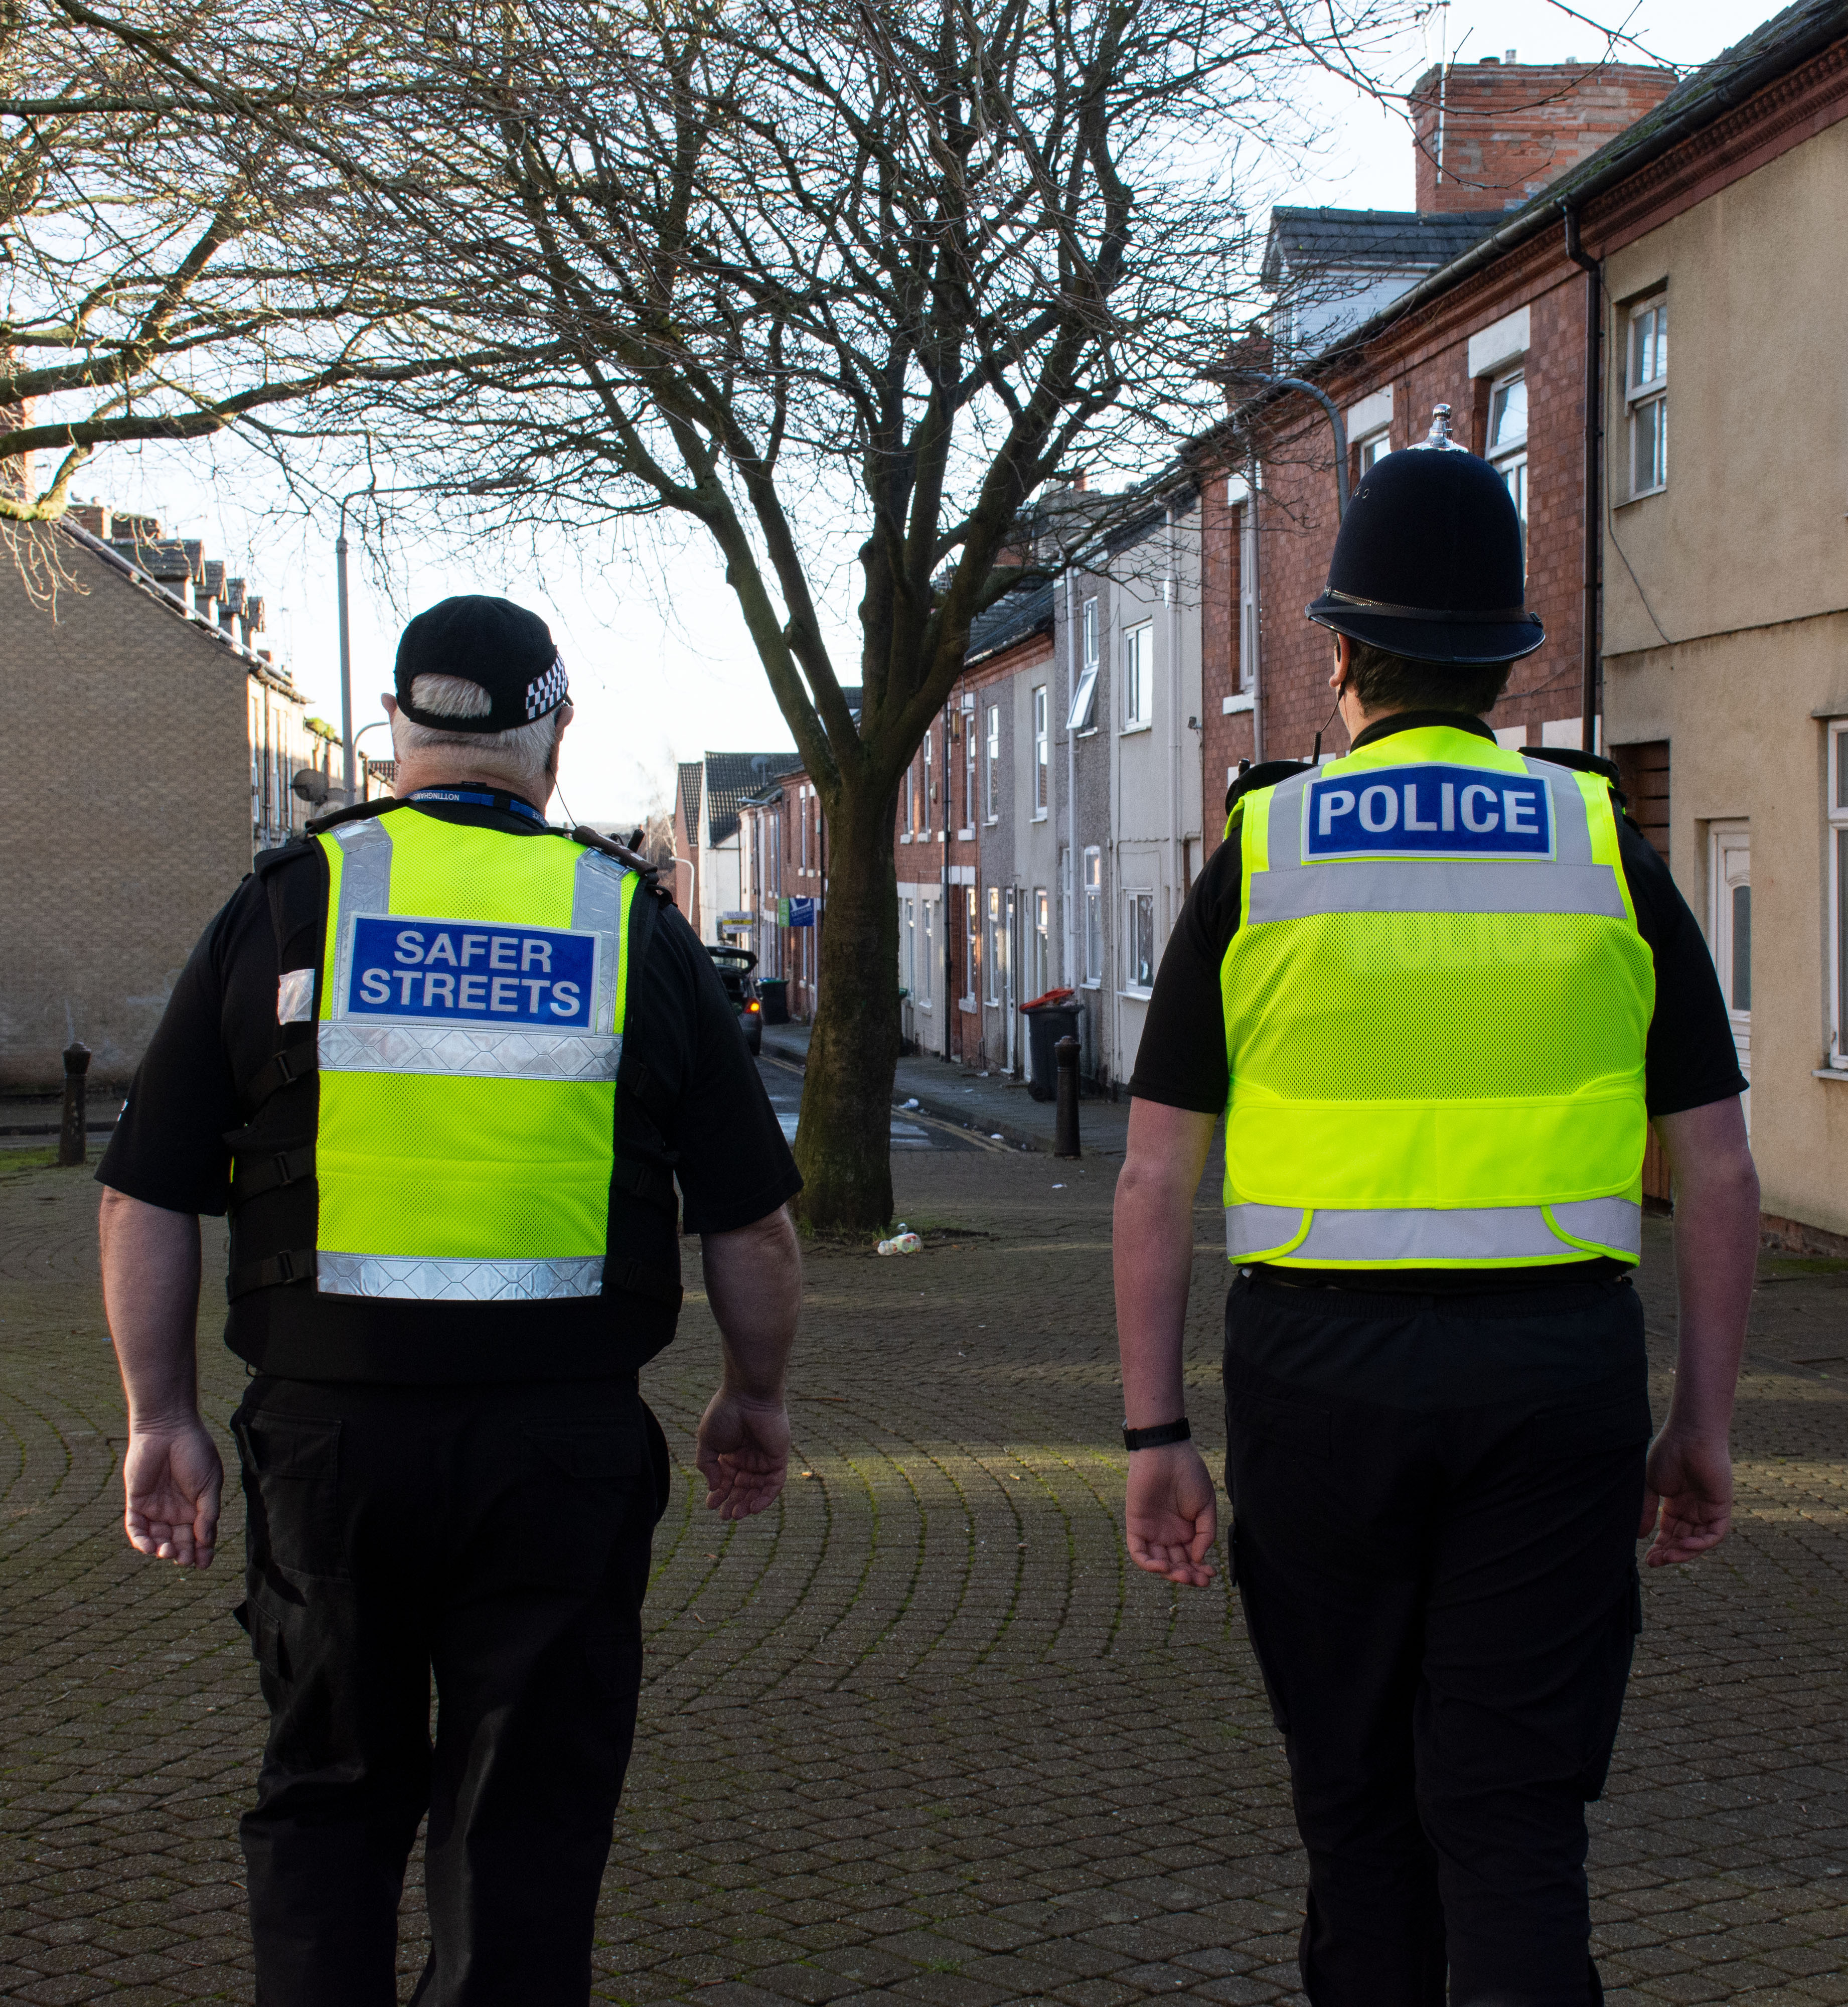 A Police Officer and a Community Protection Officer on parol on the streets of Ashfield